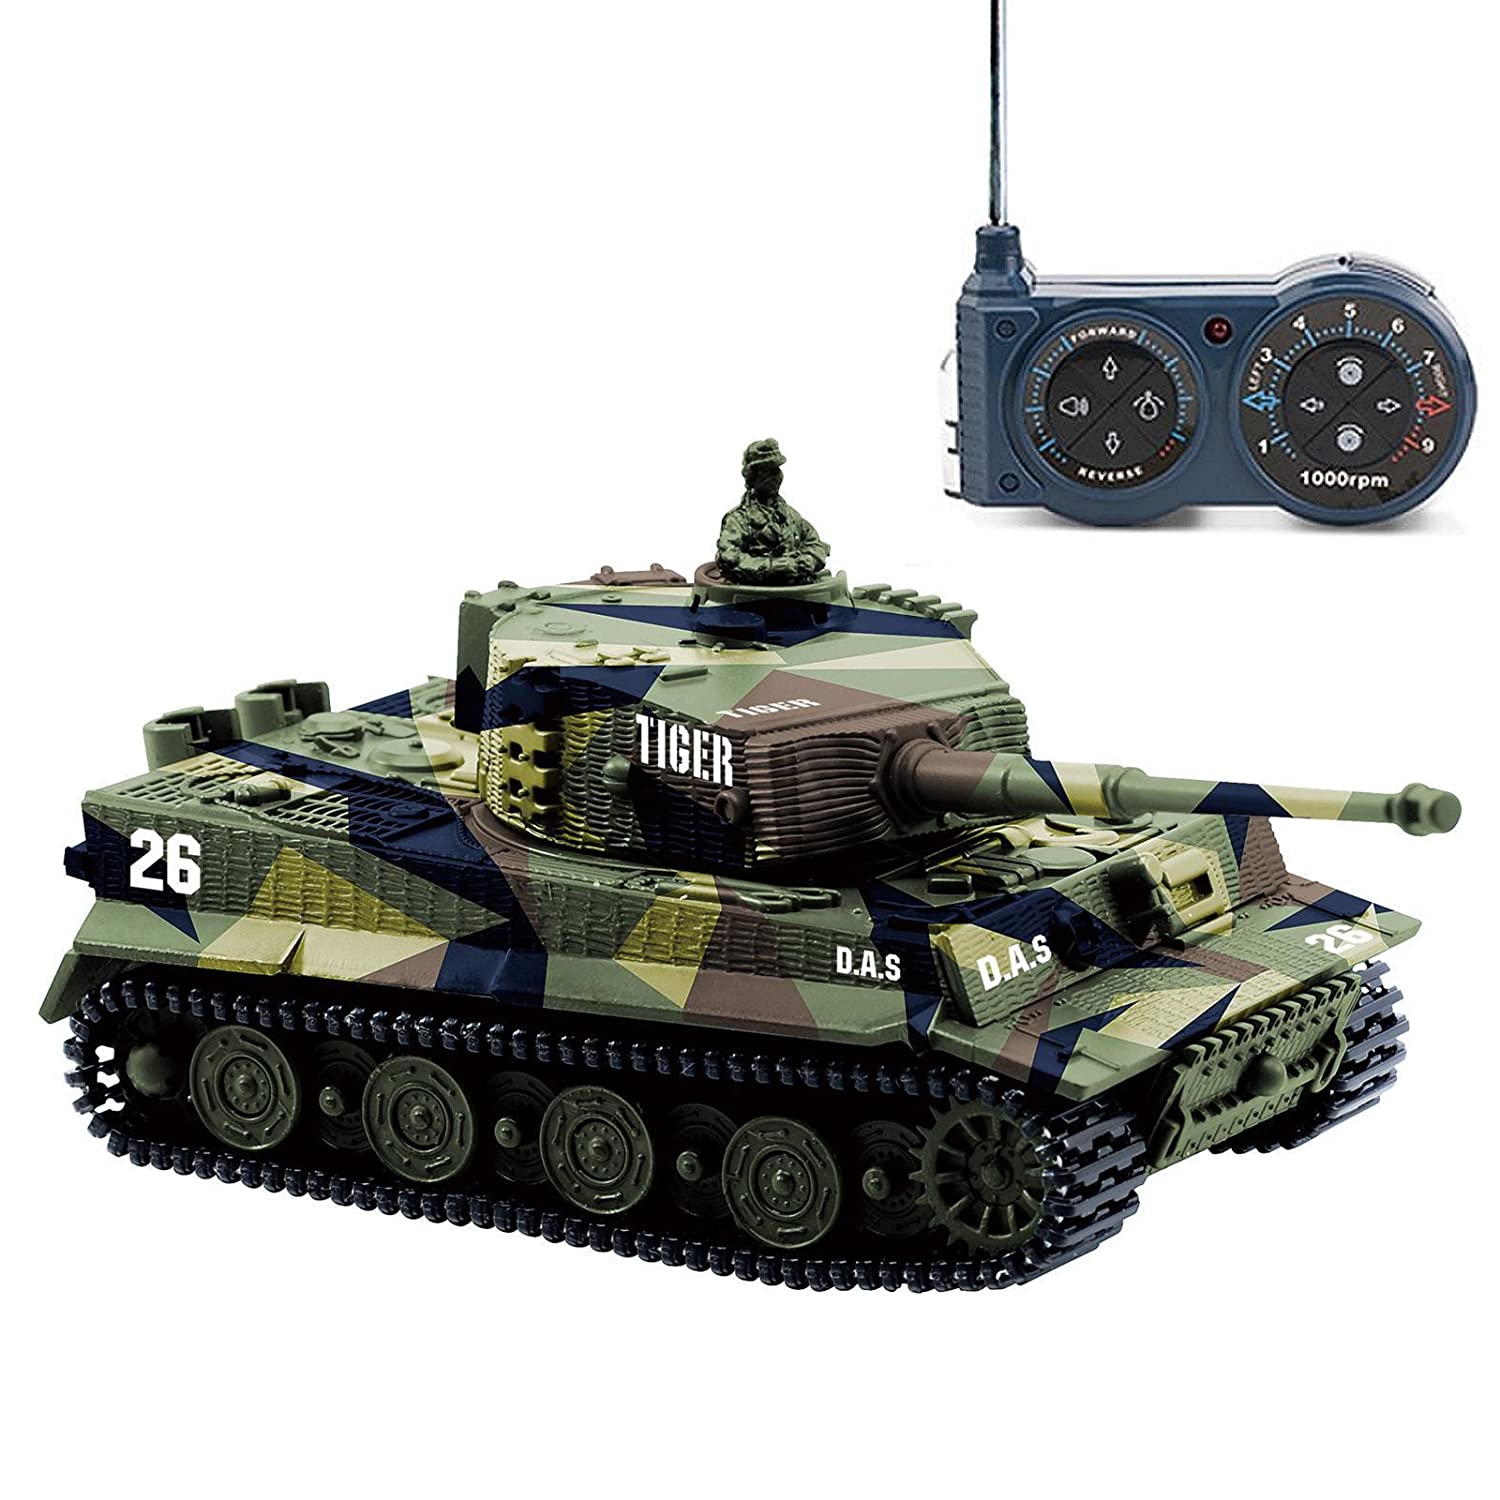 Top 9 Best Remote Control Tanks Battle Reviews in 2022 1